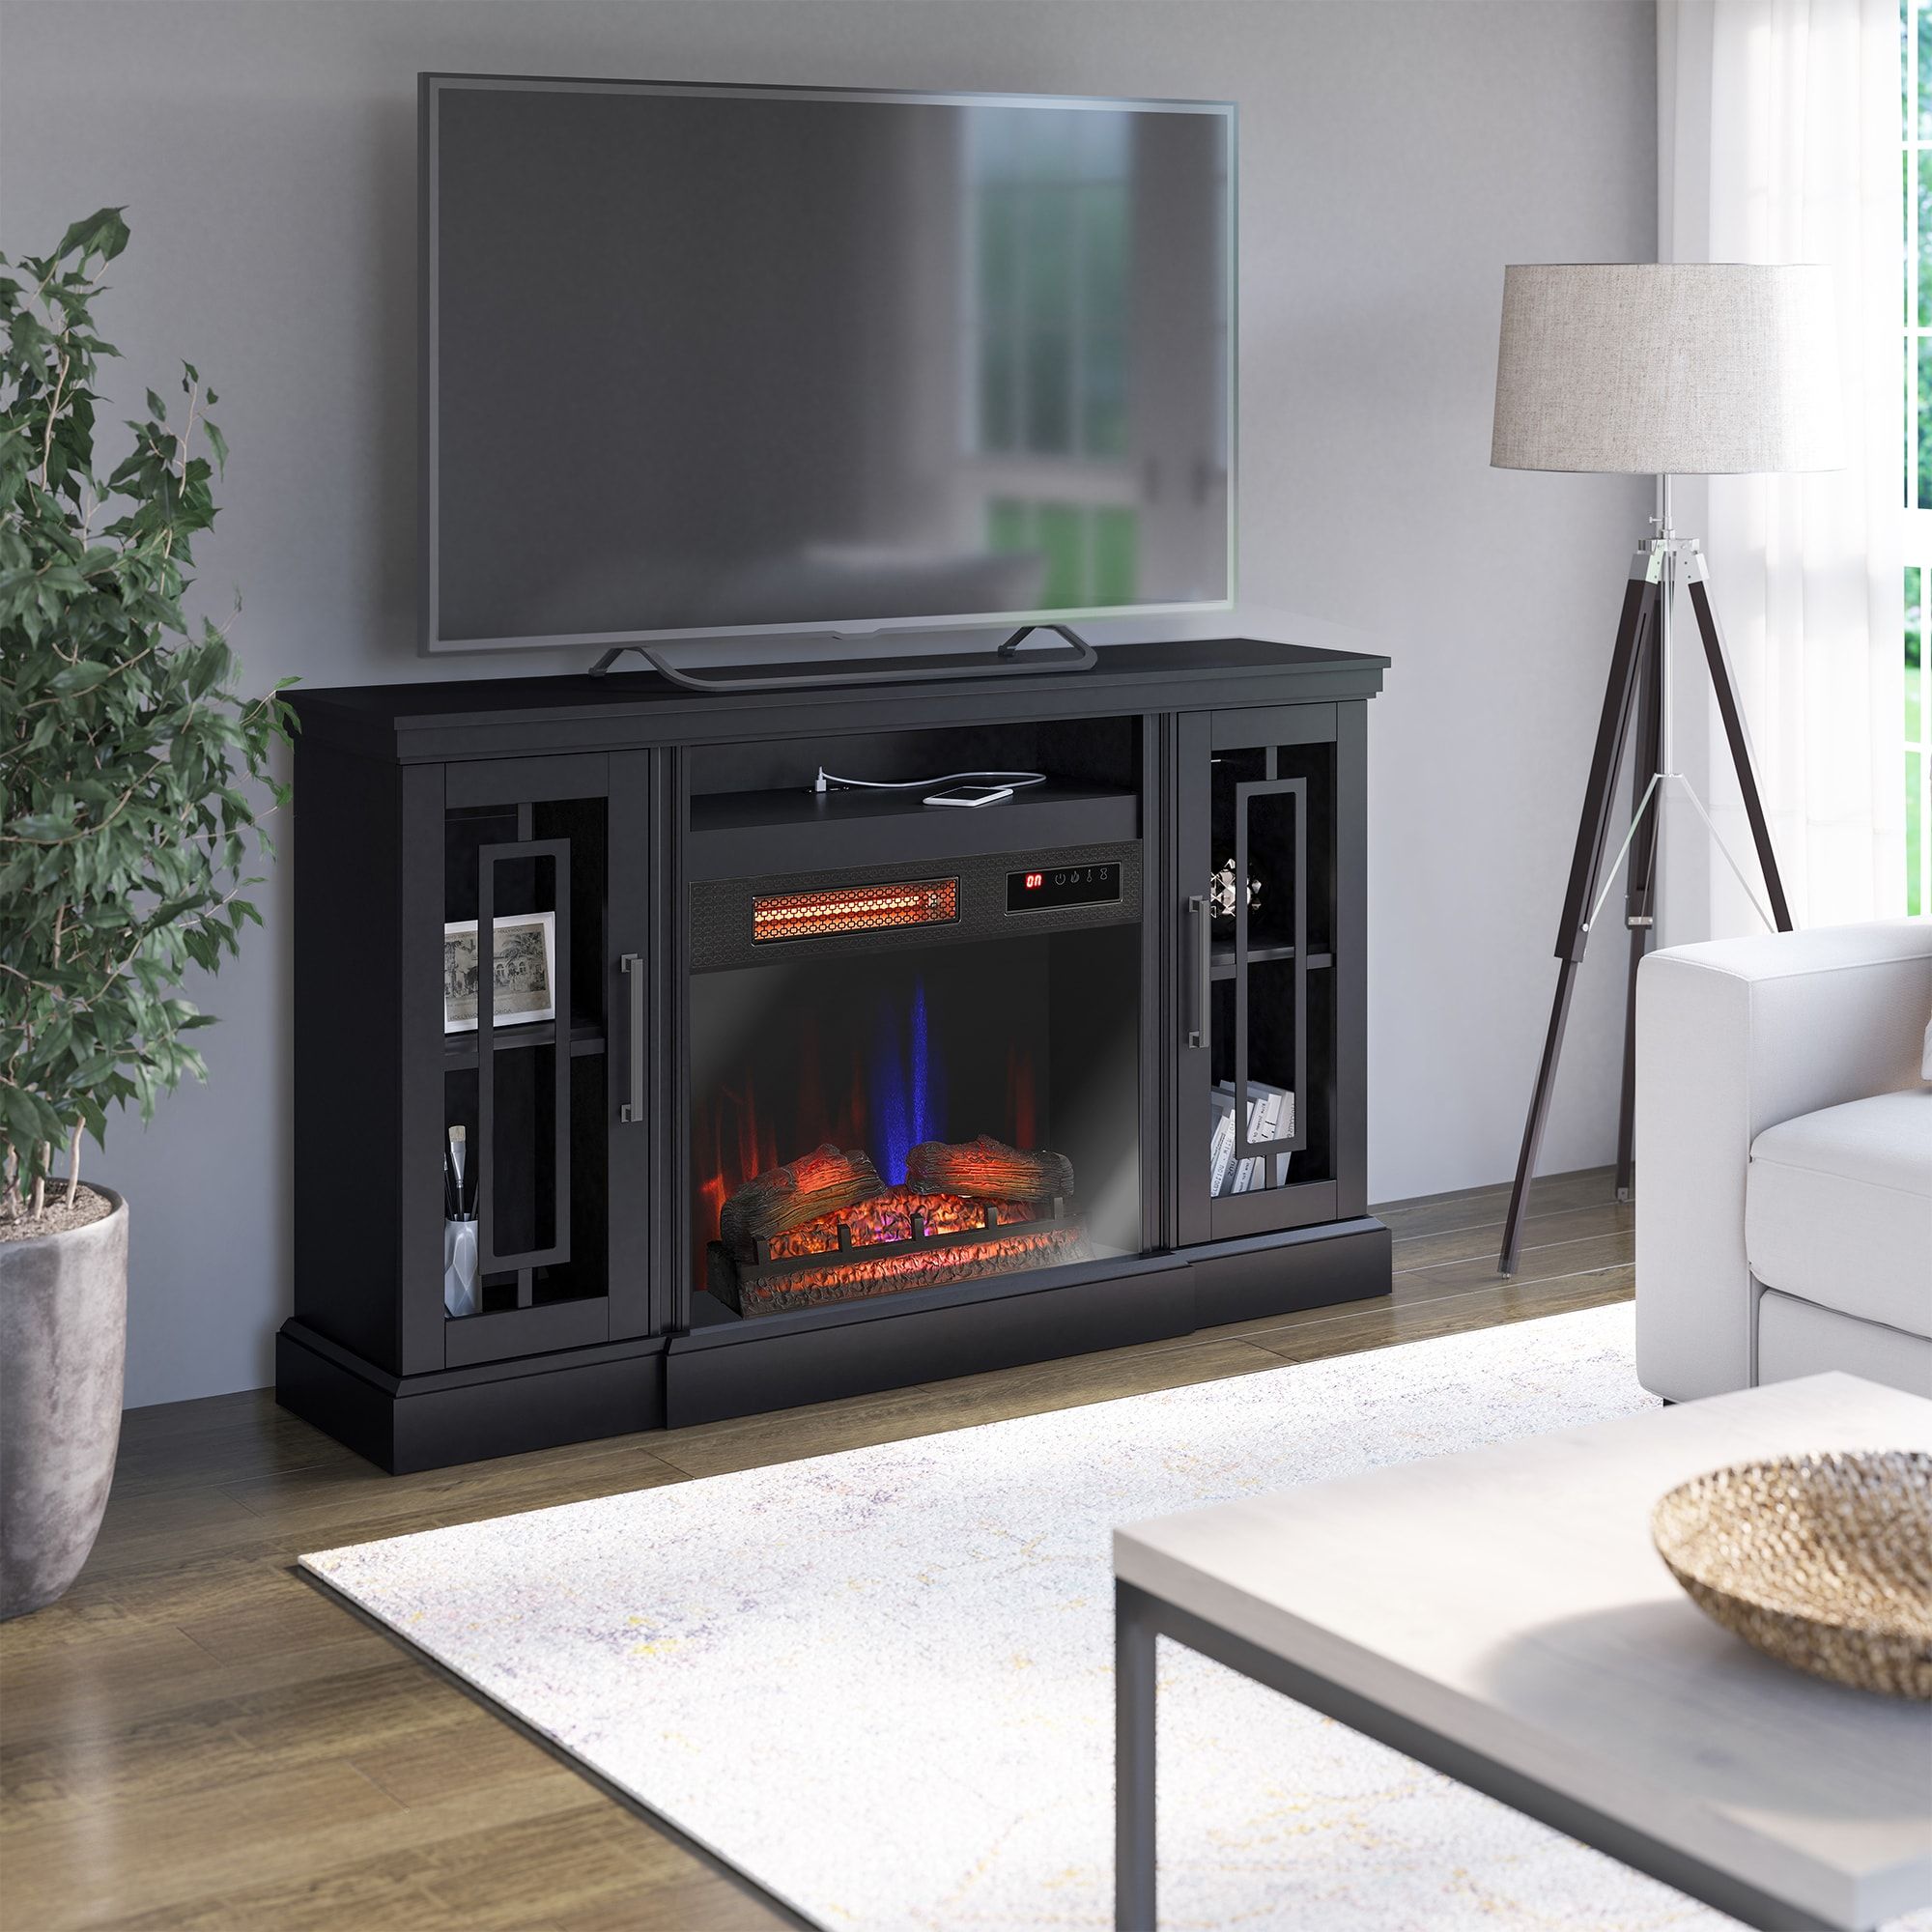 Allen + Roth 62 In W Black Tv Stand With Infrared Quartz Electric Fireplace  In The Electric Fireplaces Department At Lowes With Regard To Tv Stands With Electric Fireplace (View 10 of 15)